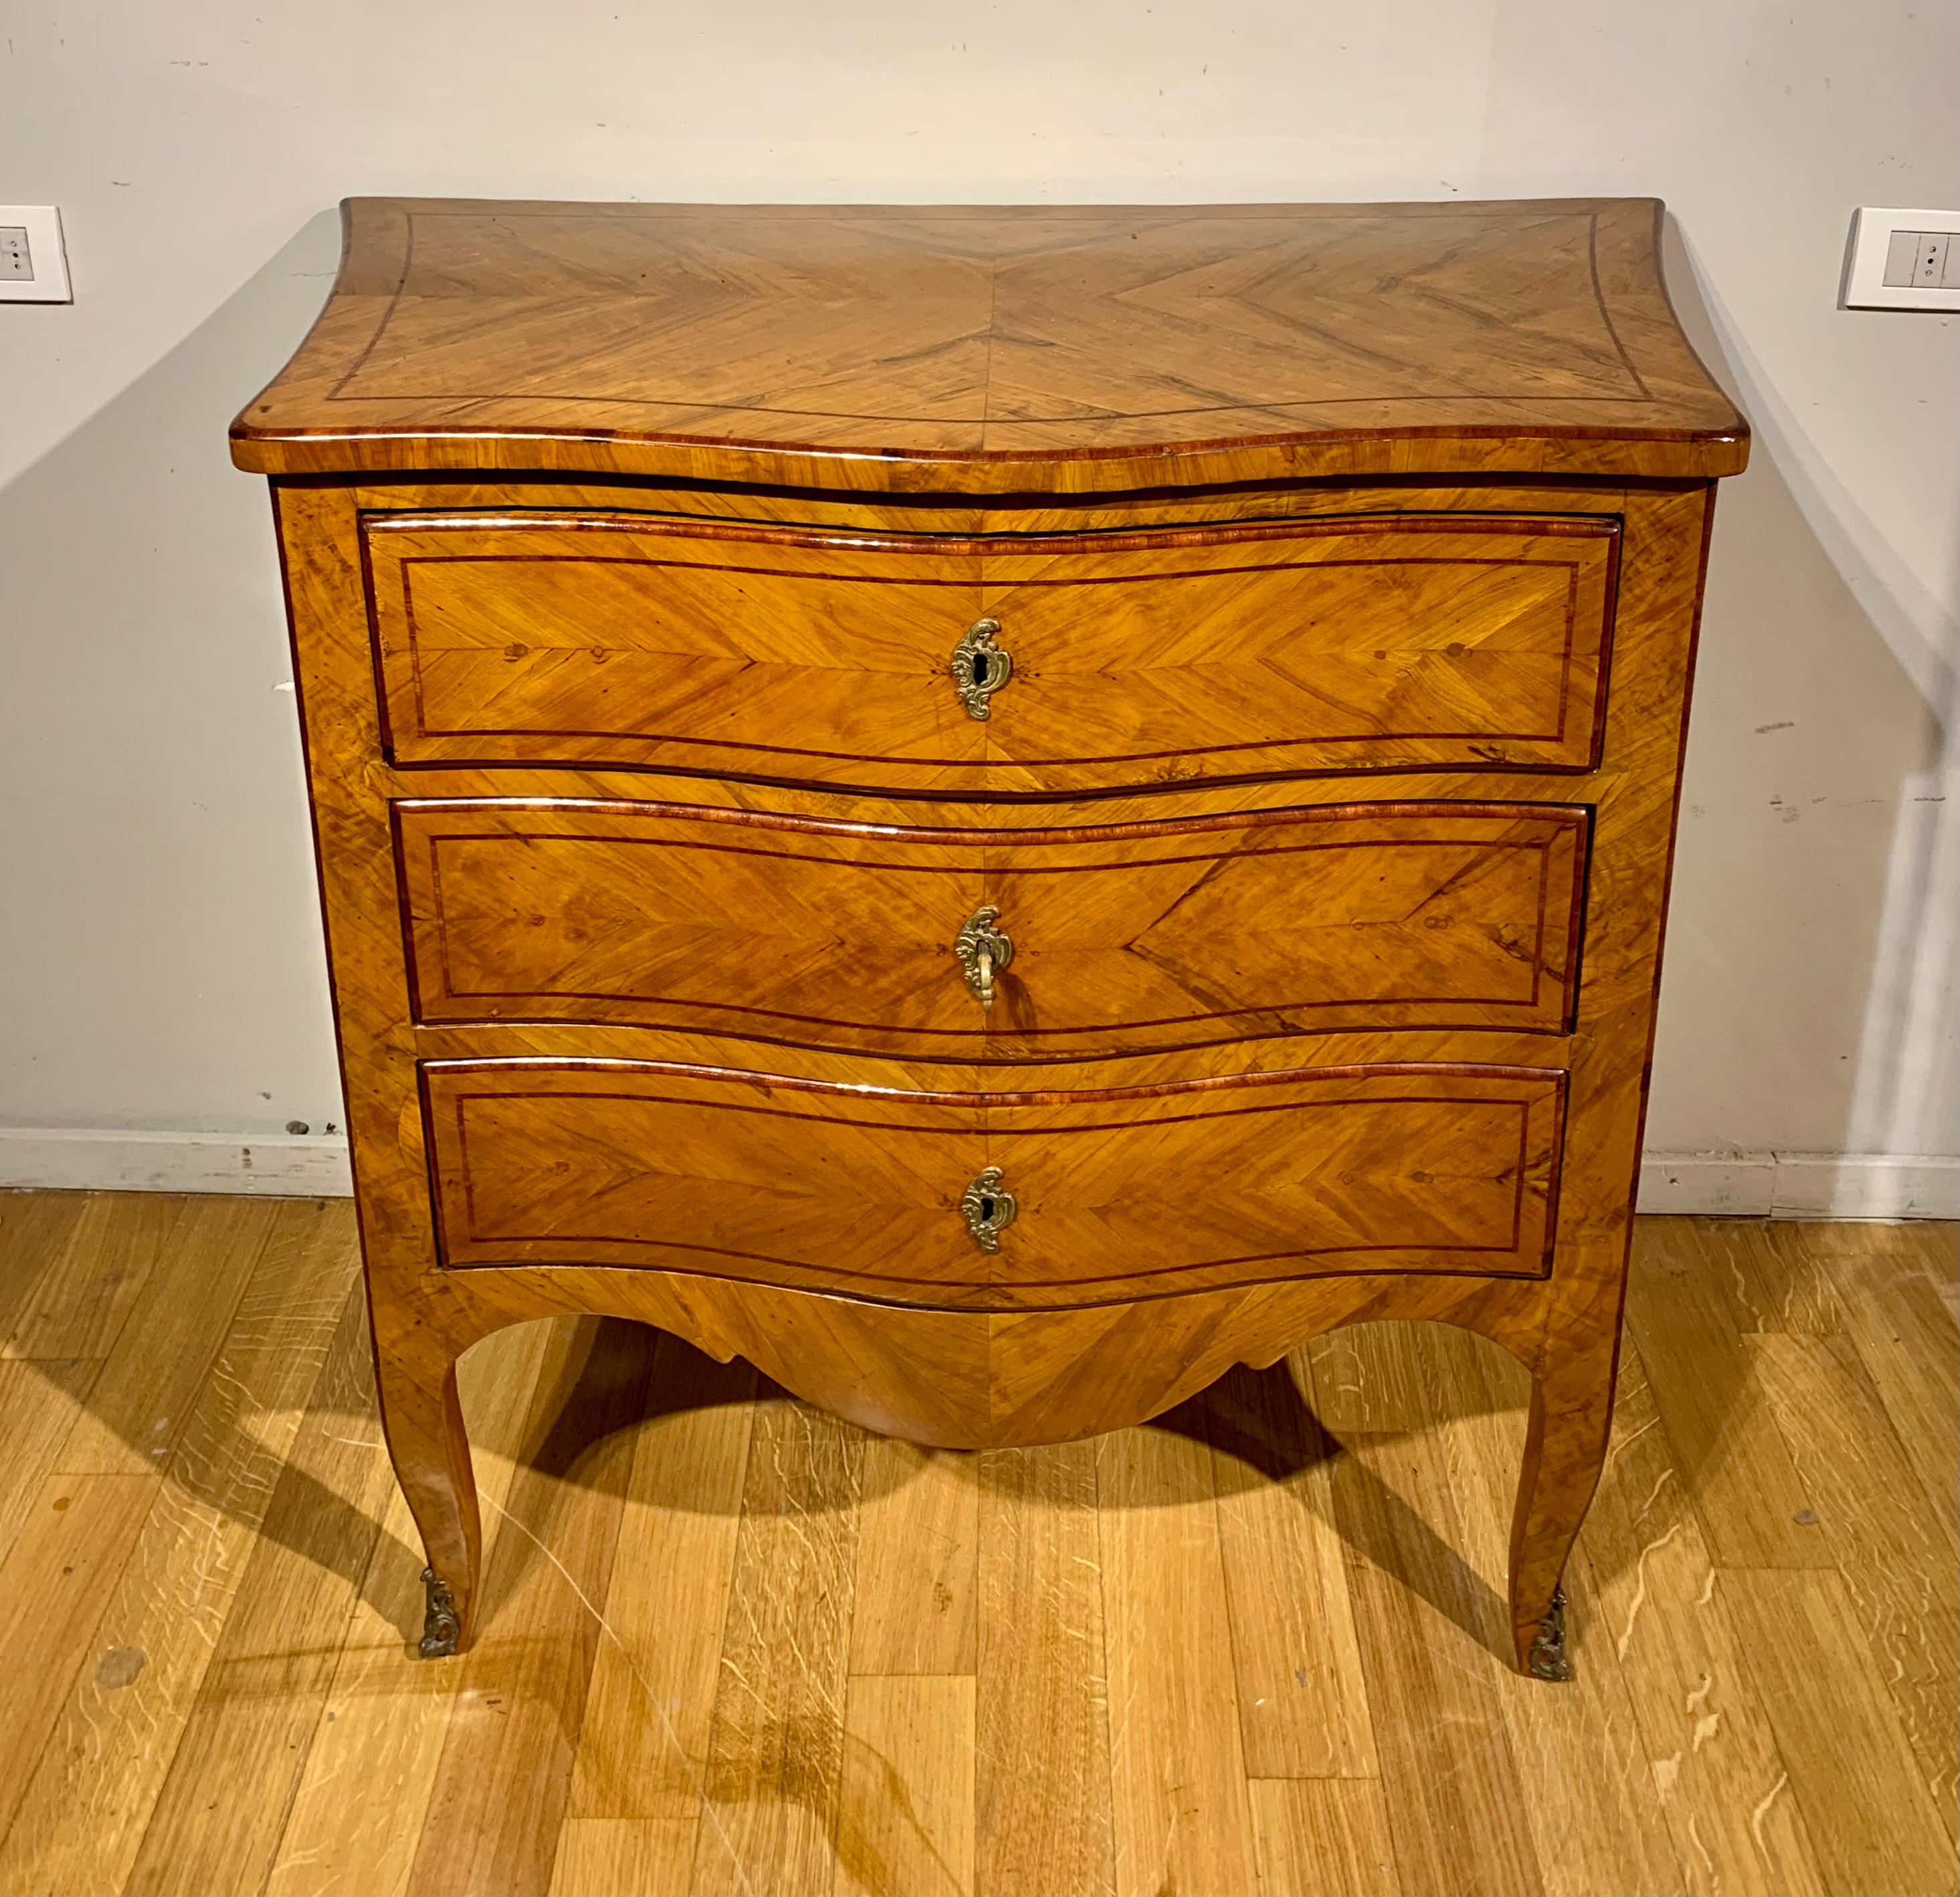 Elegant chest of drawers entirely veneered in olive wood with rosewood and rosewood fillets. Small finishes in lost wax cast bronze, moved on the front and on the sides, it is very roomy and slender thanks to the very slender curved legs. Viterbo